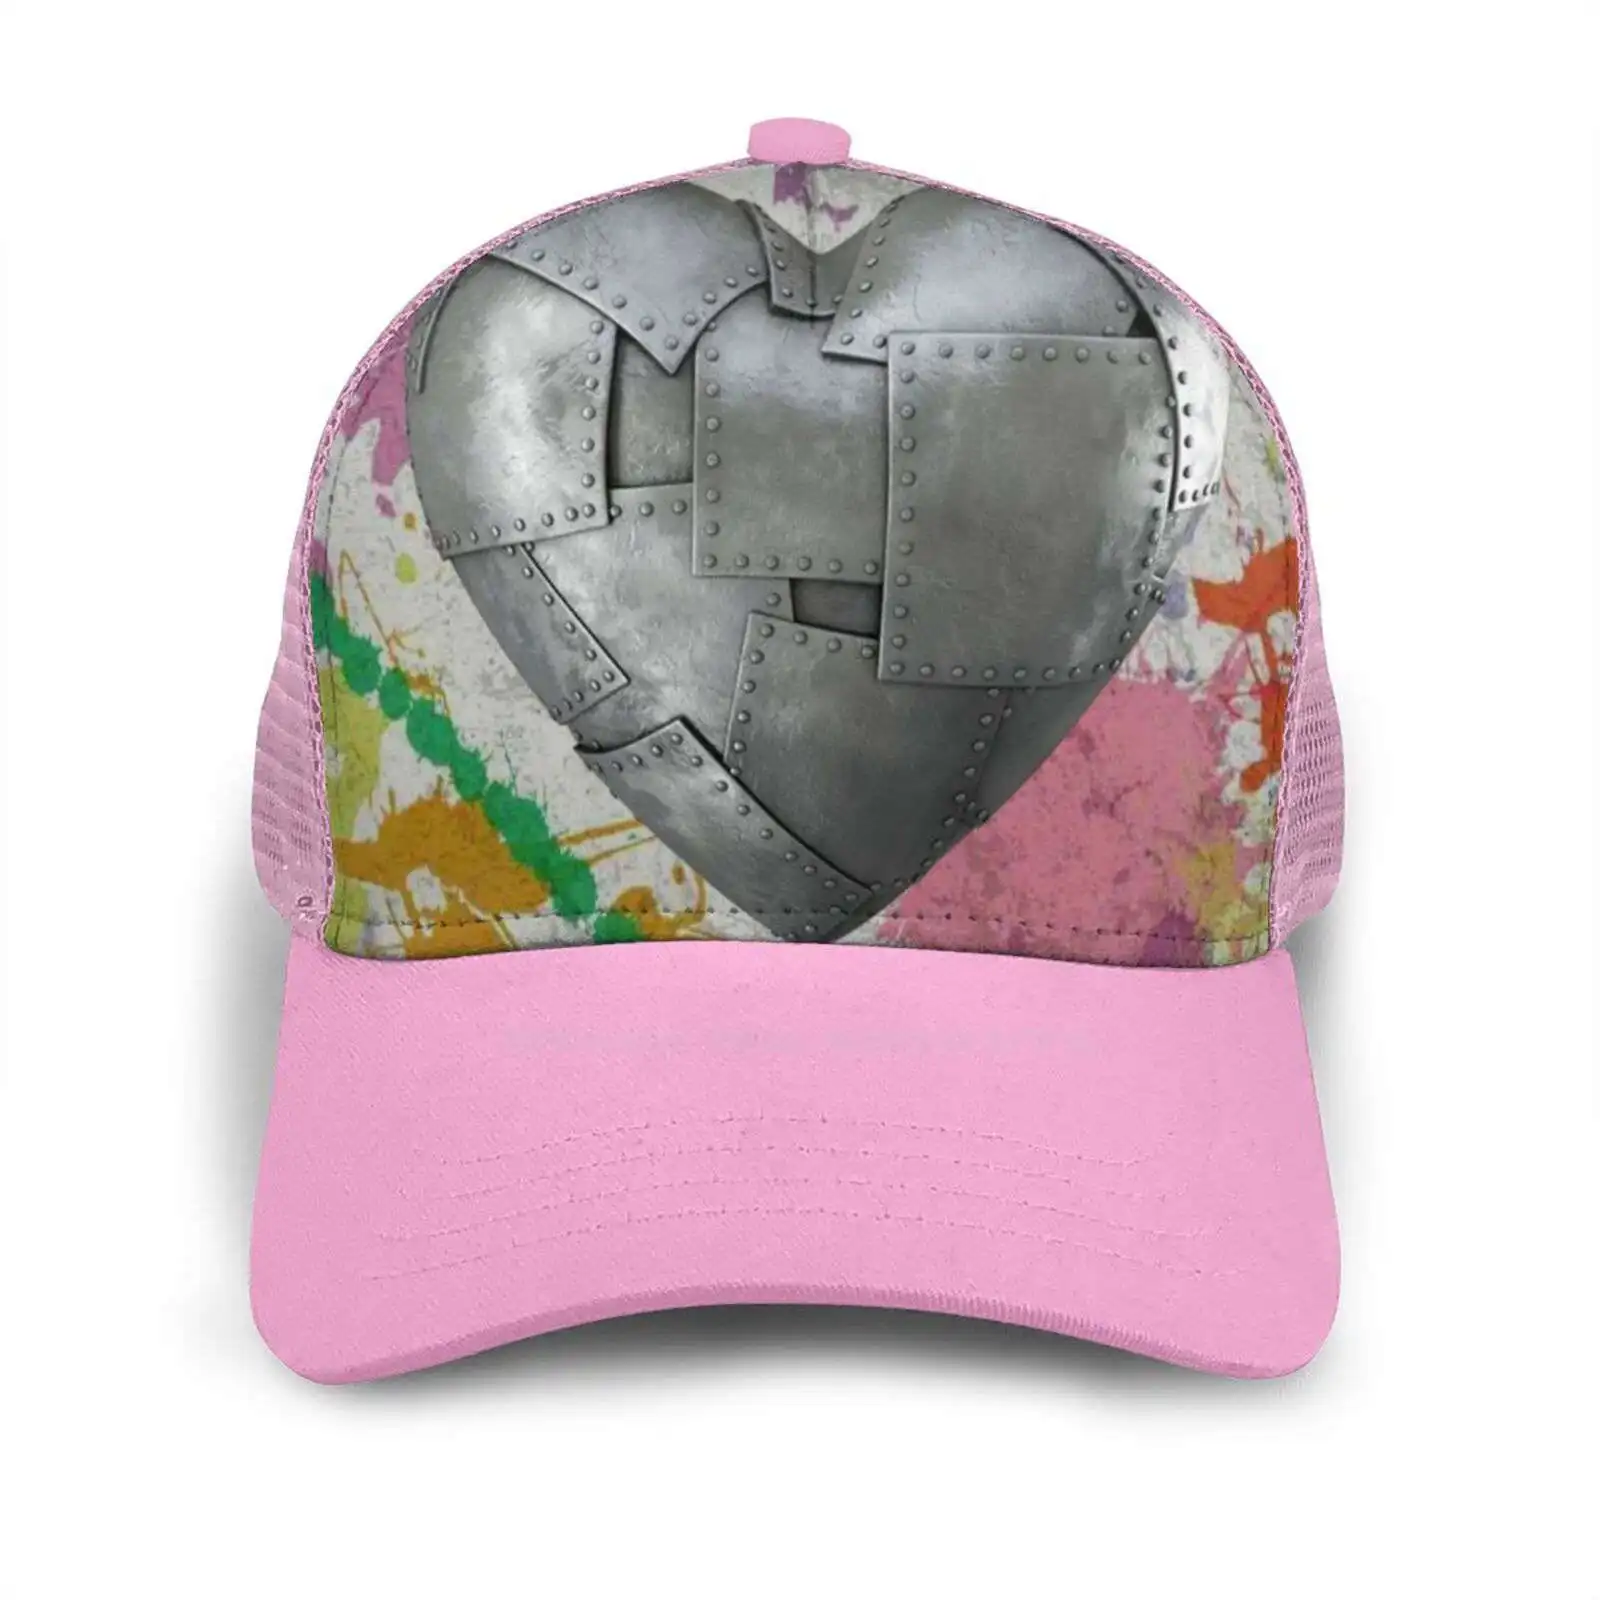 

Metallic Heart Baseball Hat For Outdoor Sports Cap Heart Hearts Textures Texture Textured Metallic Hearts Metal Abstract